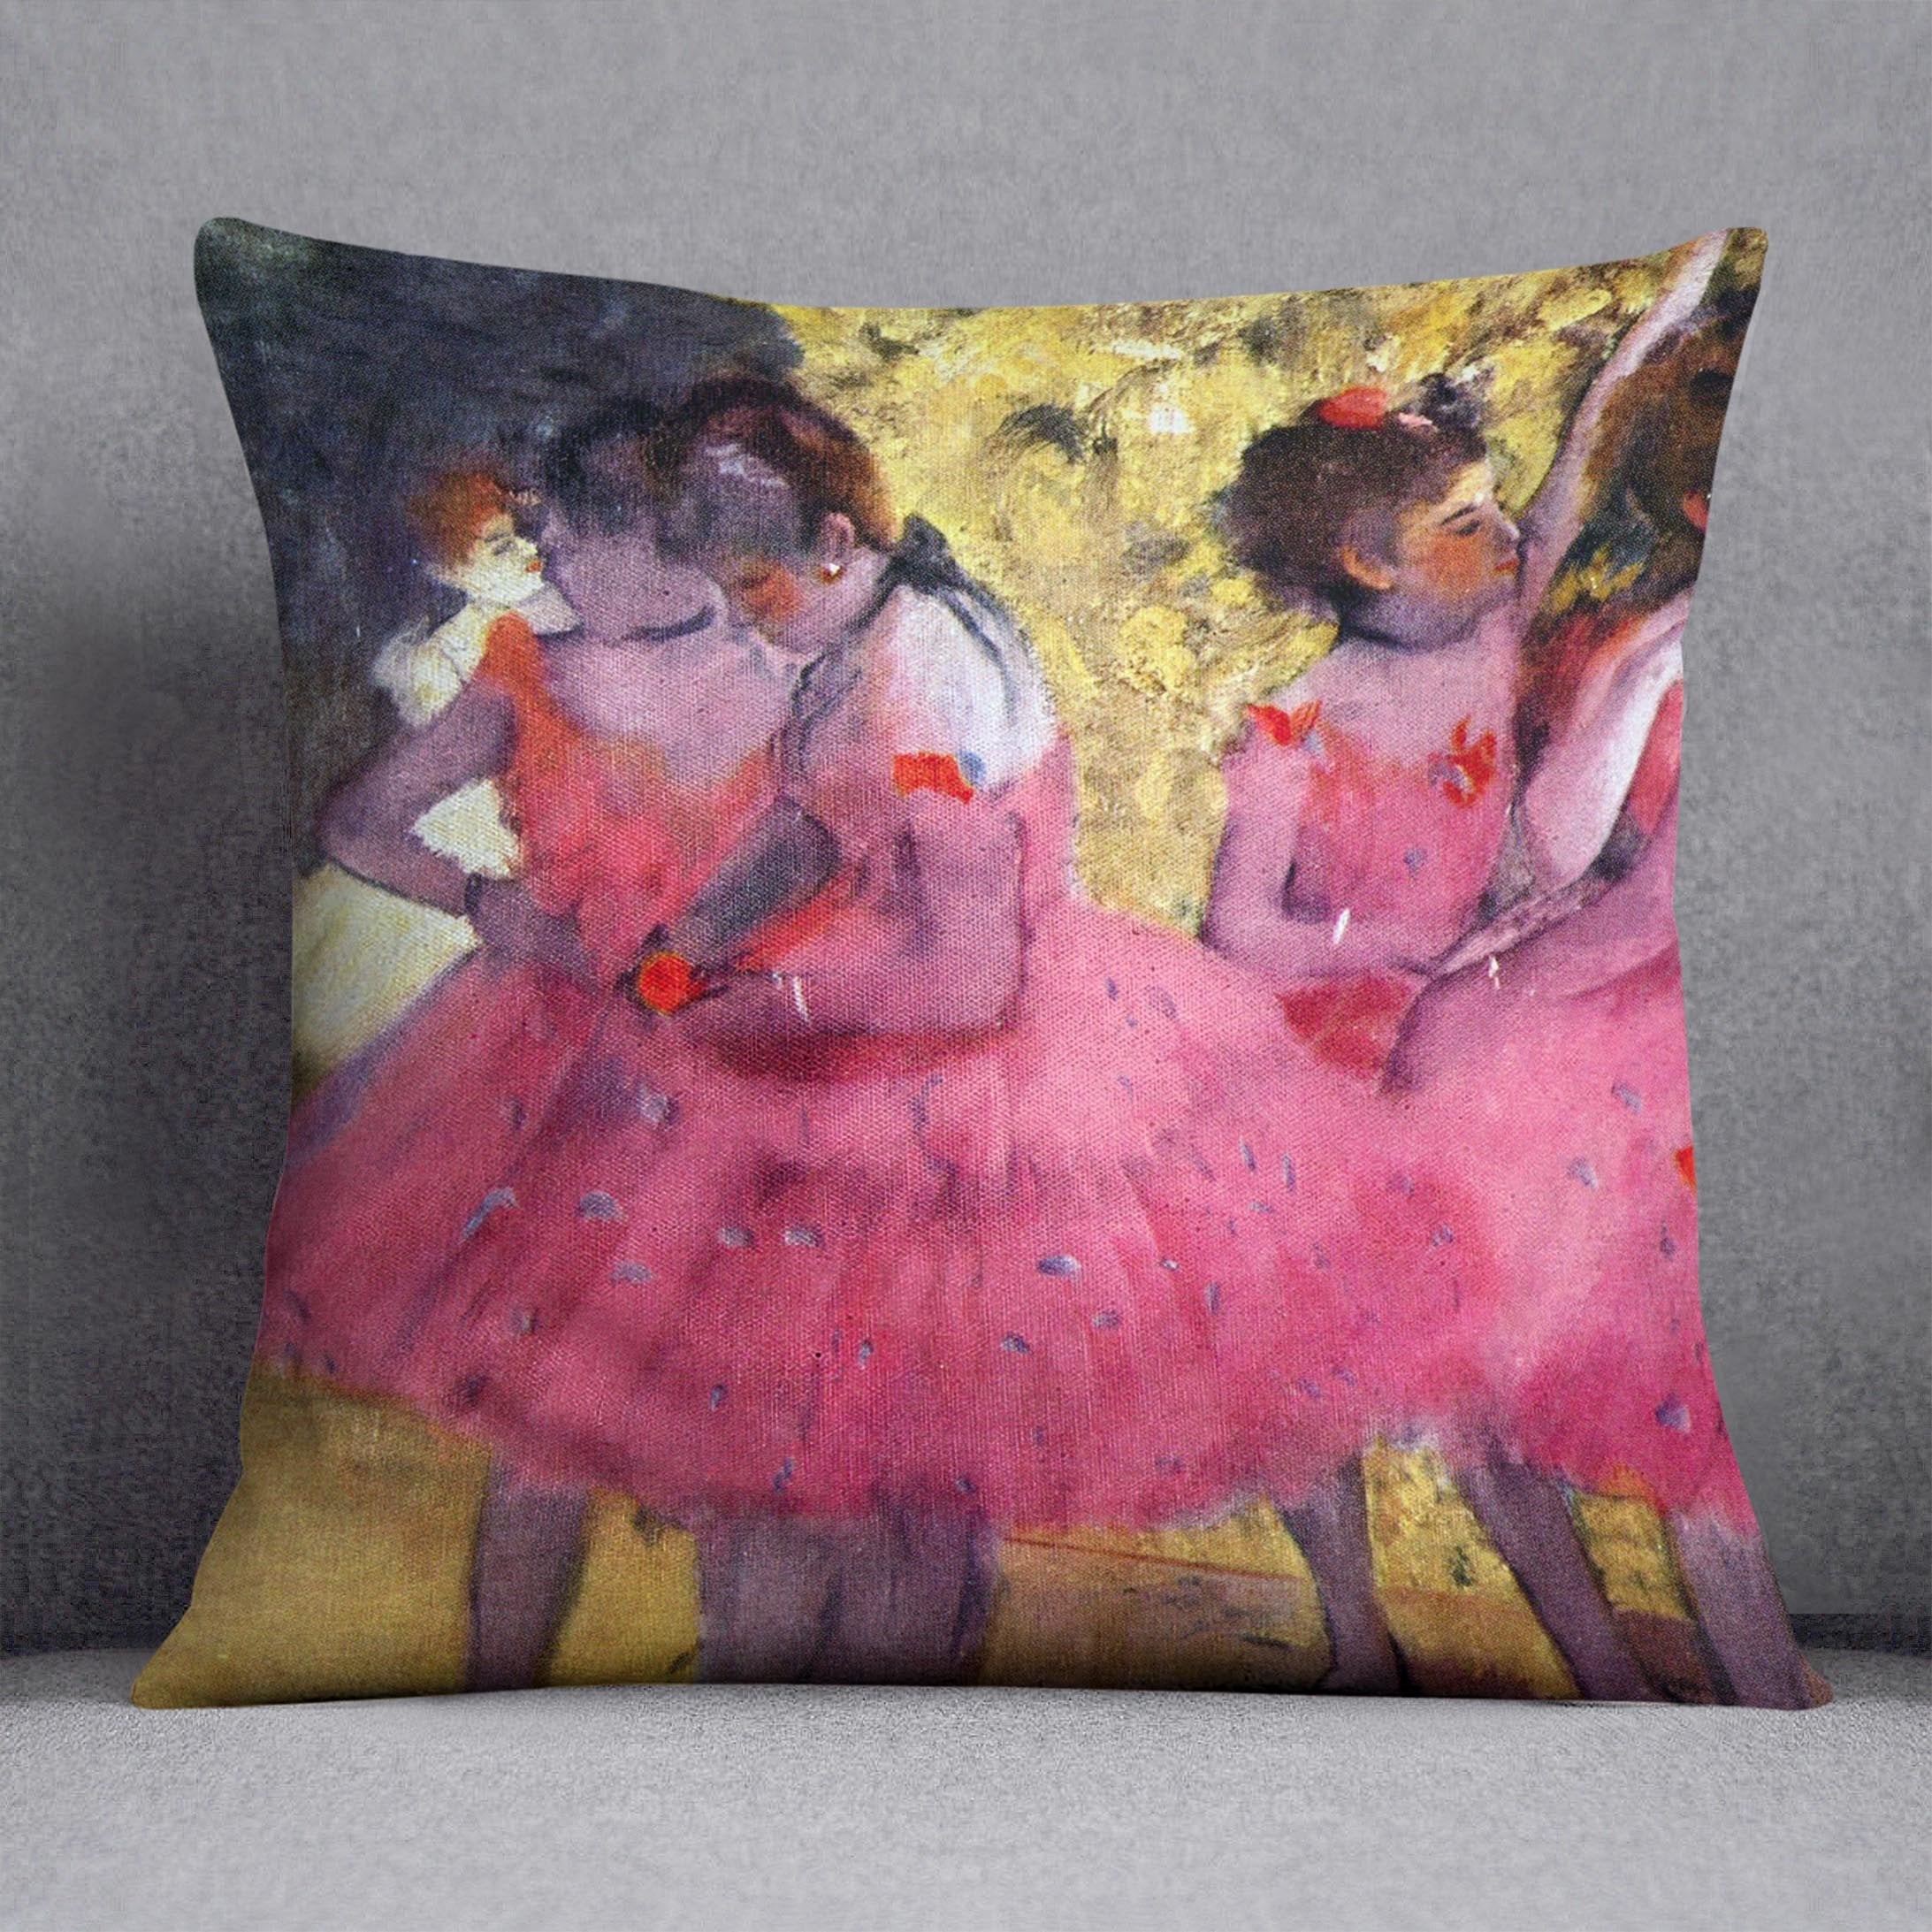 Dancers in pink between the scenes by Degas Cushion